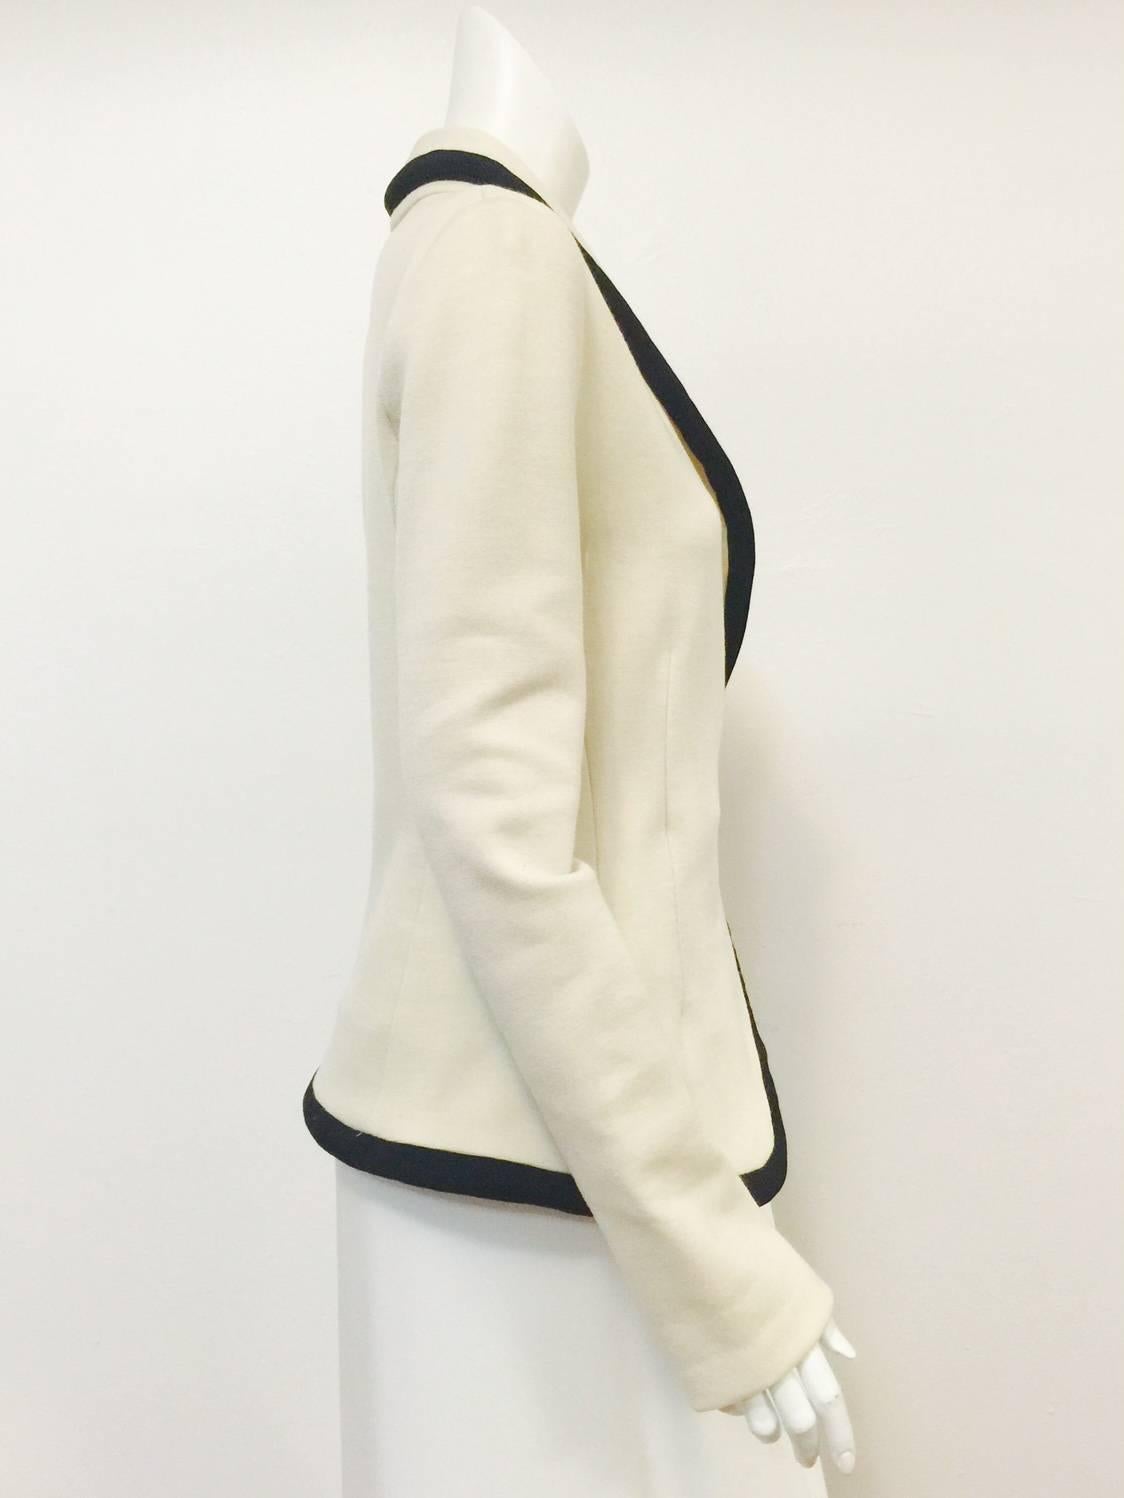 Balenciaga Fitted Ivory Wool Jersey Jacket is a bold design reminiscent of sweaters worn by collegiate varsity athletes.  Features exquisite fabric with just the right amount of stretch, shawl collar, offset snap closure and asymmetric hem.  Single